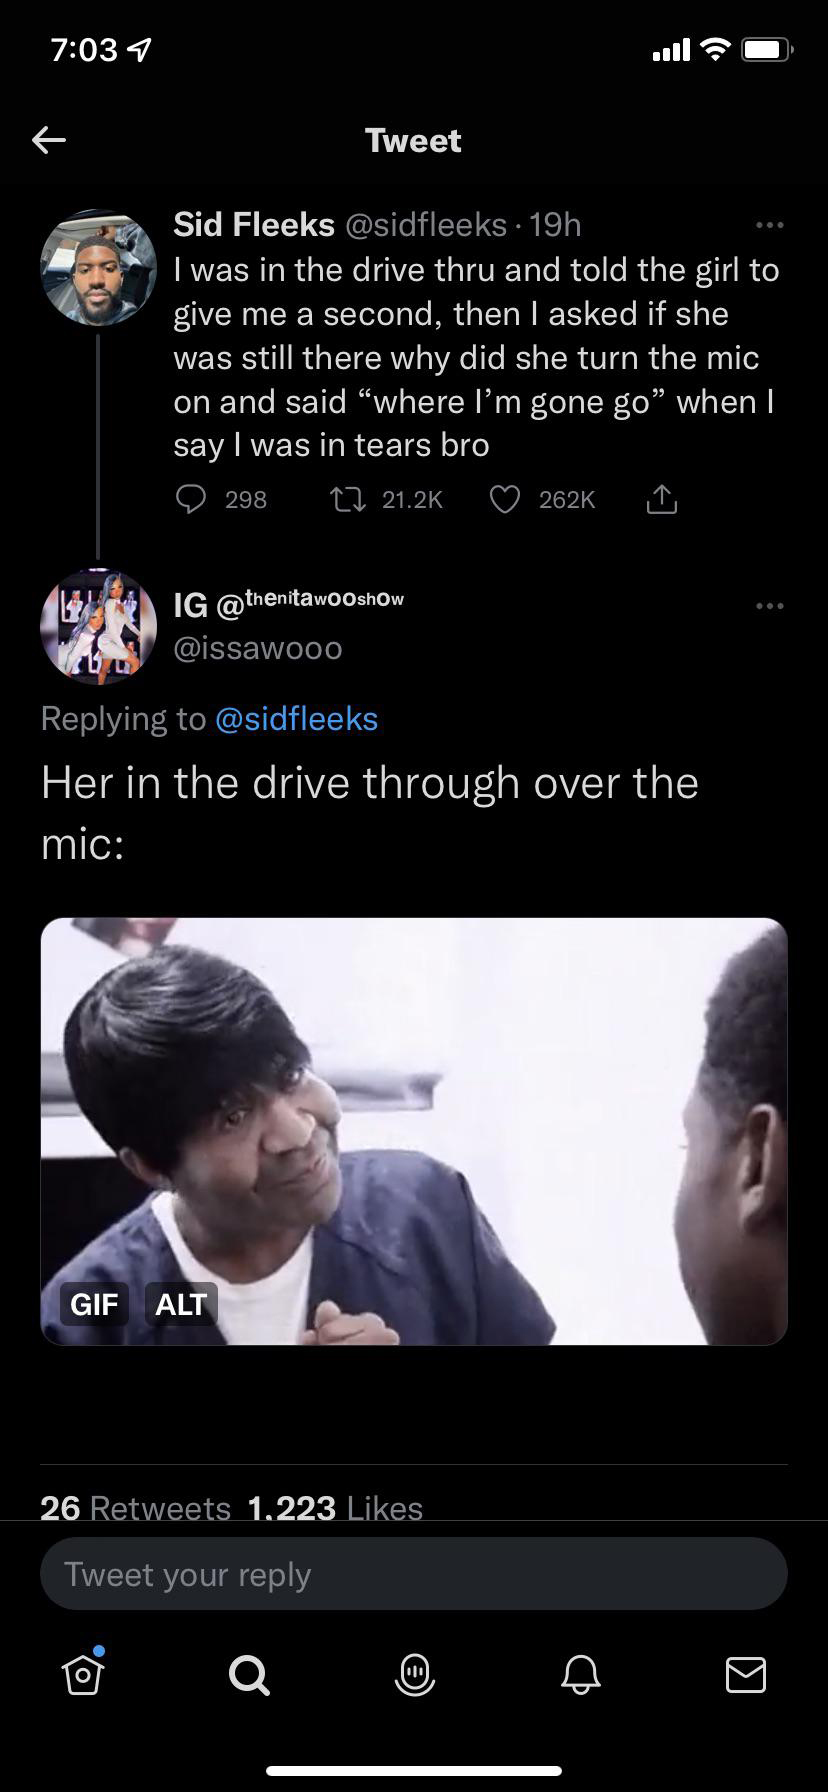 Funny Tweets - I was in the drive thru and told the girl to give me a second, then I asked if she was still there why did she turn the mic on and said